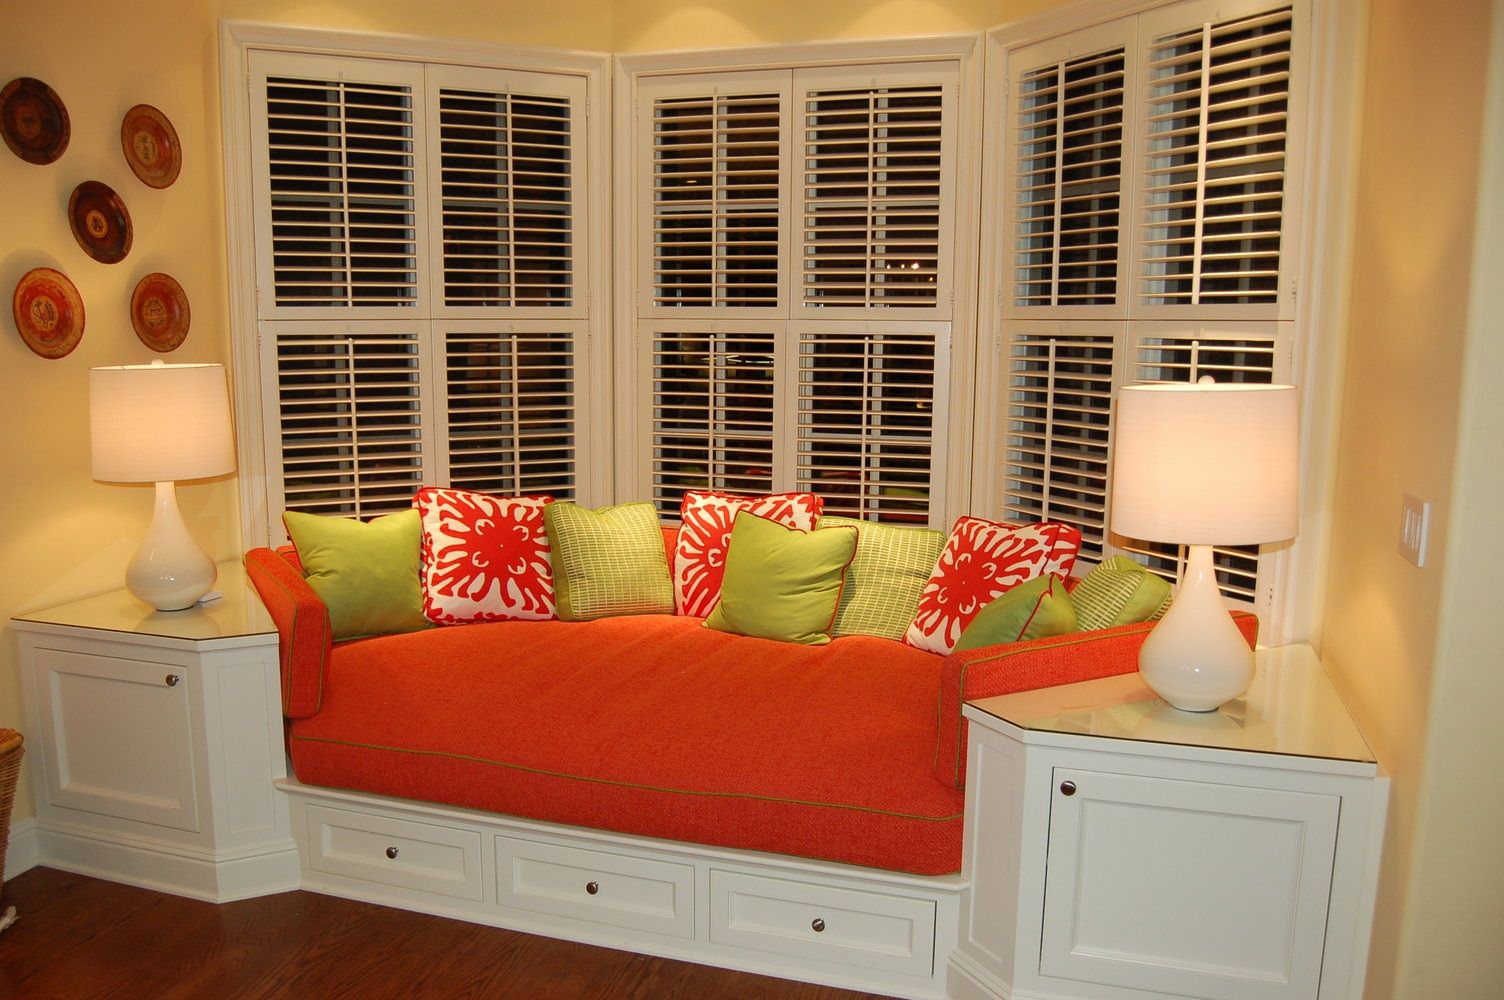 comfy bay window seat. Love the end tables built in